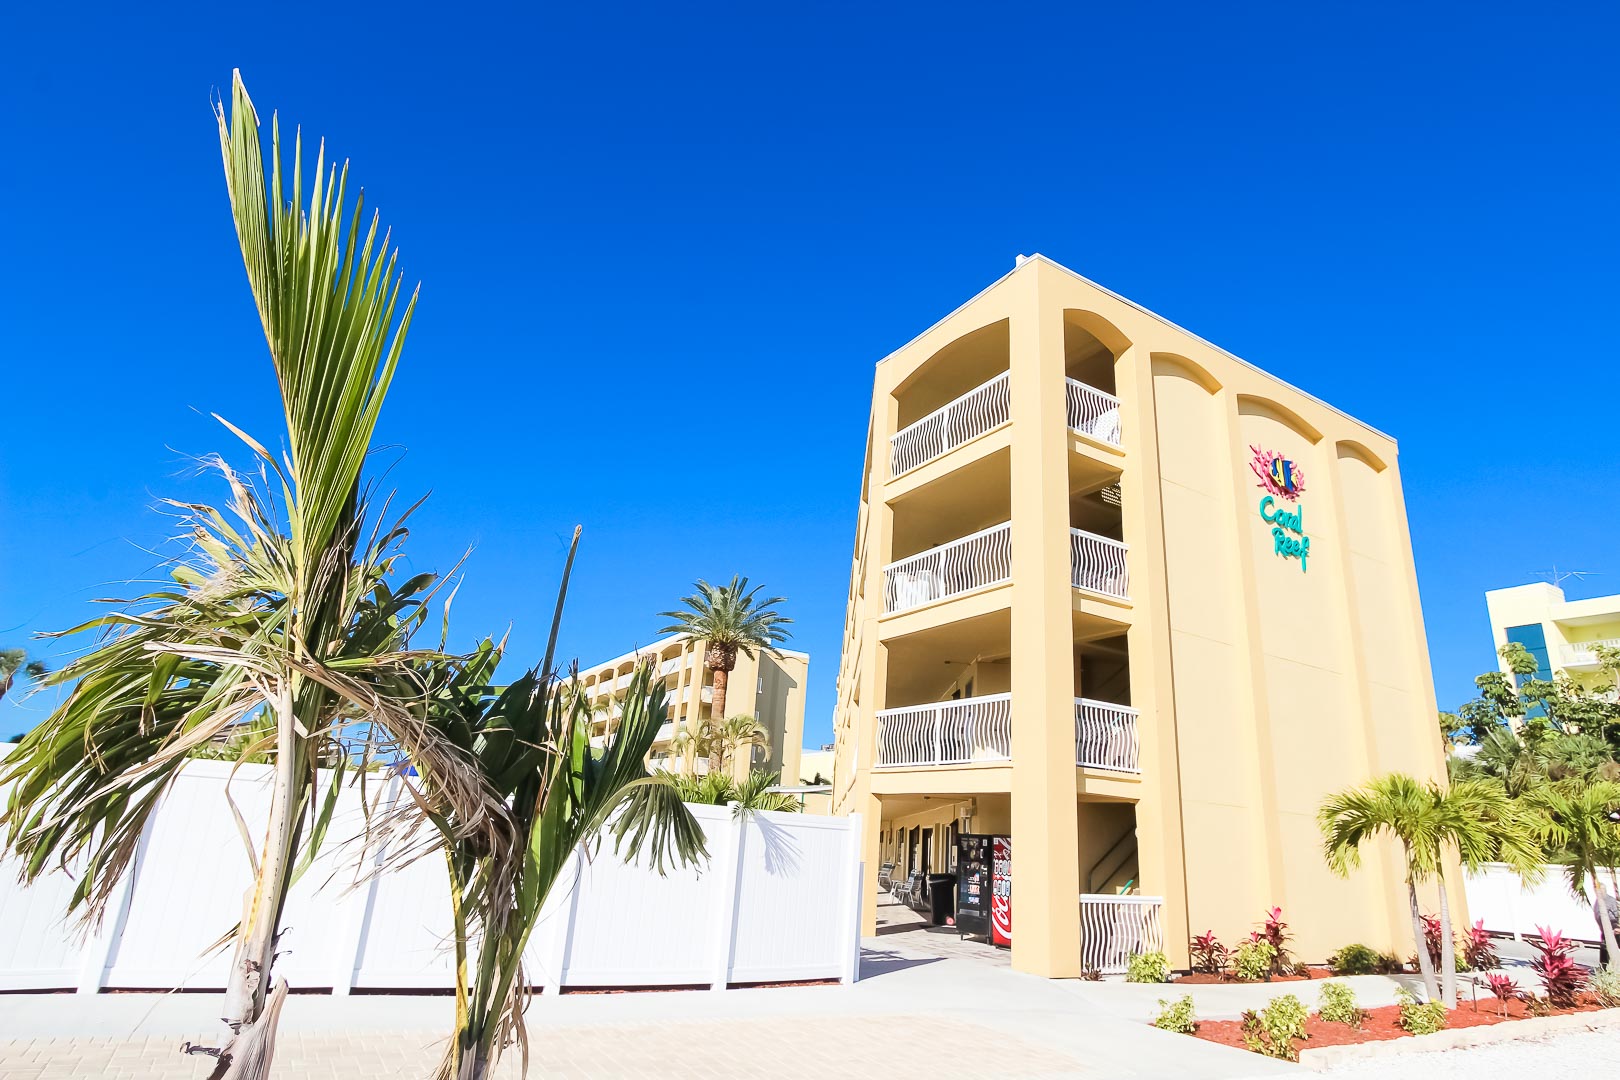 A view of the exterior building of VRI's Coral Reef Beach Resort in St. Pete Beach, Florida.